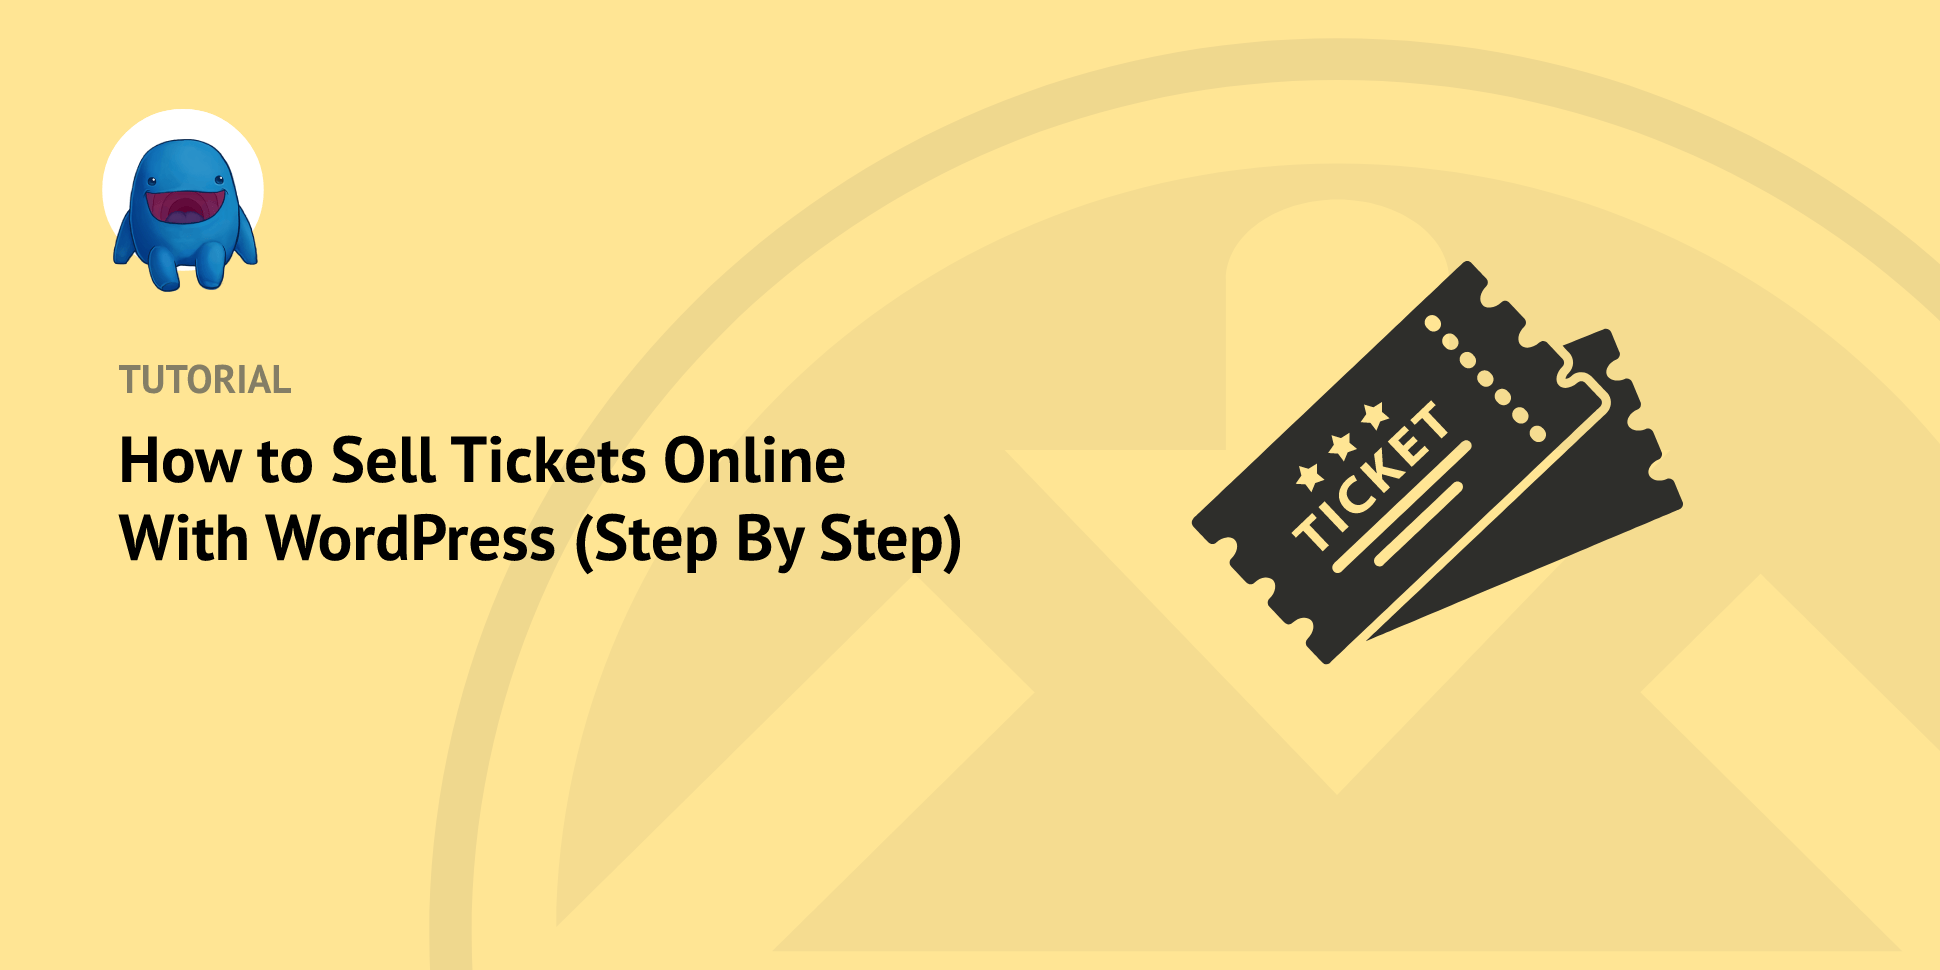 How to Sell Tickets Online With WordPress